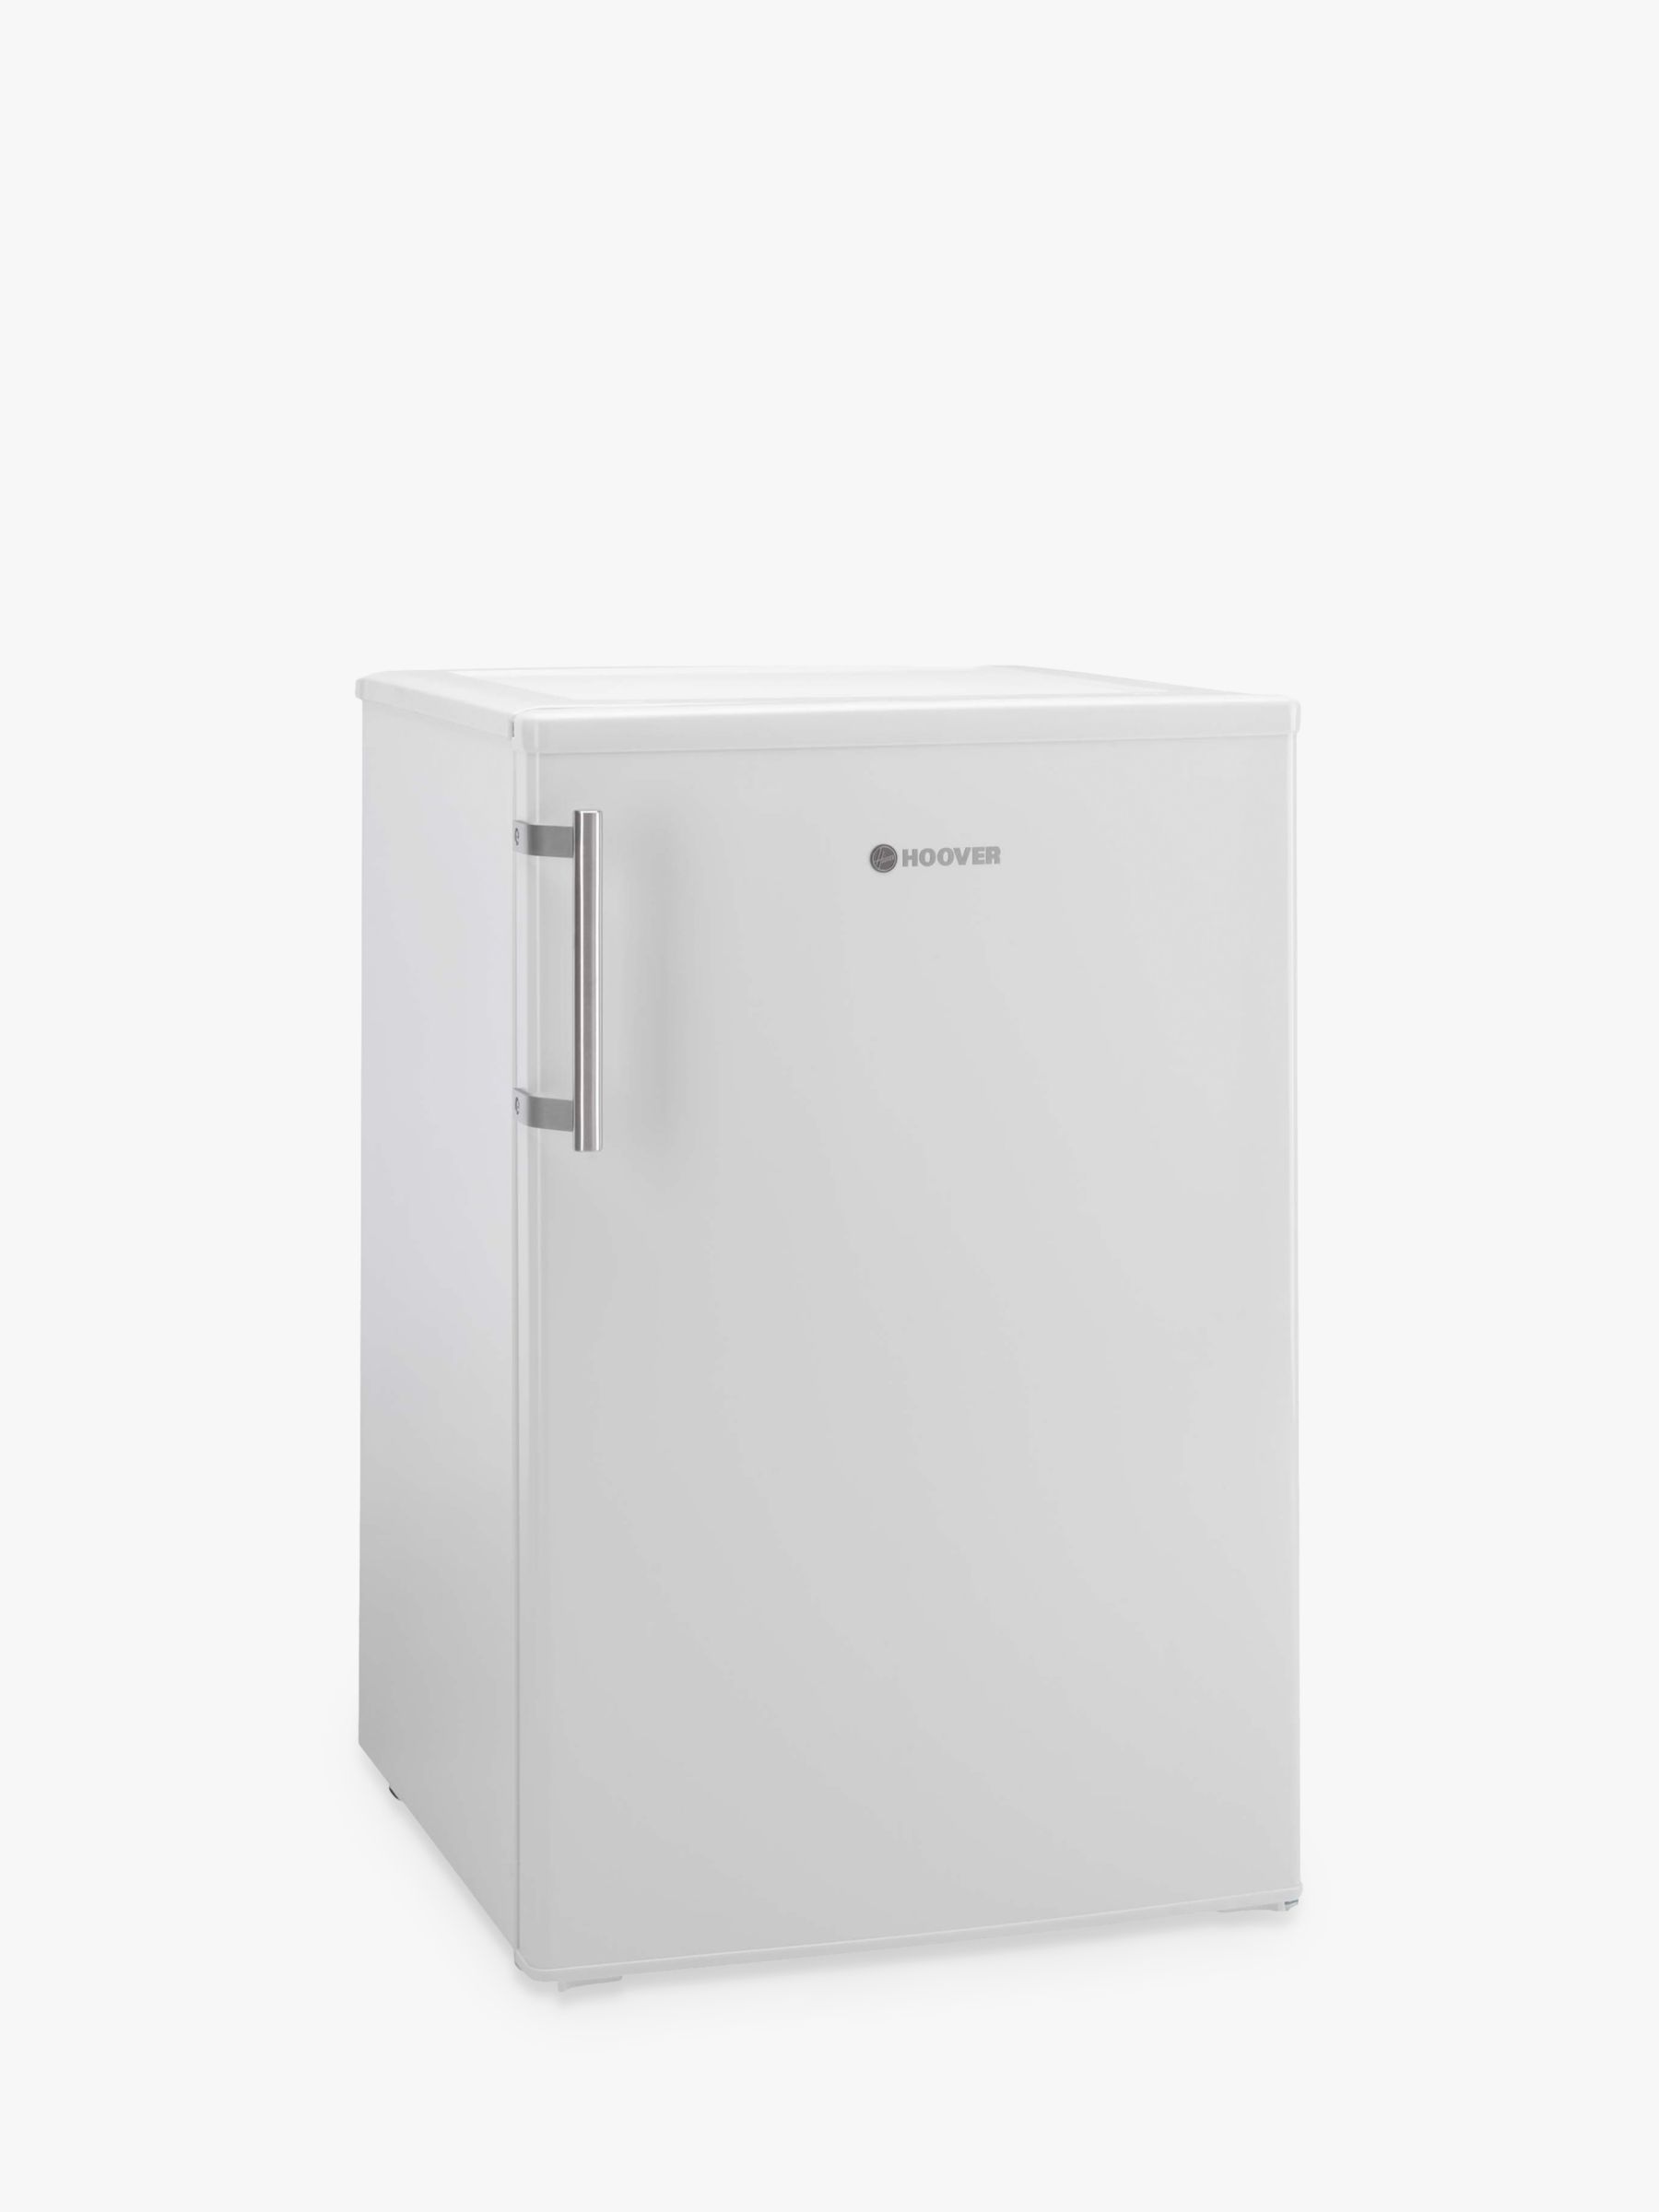 Hoover HVTU542WHK Undercounter Freestanding Freezer, A+ Energy Rating, 55cm Wide, White